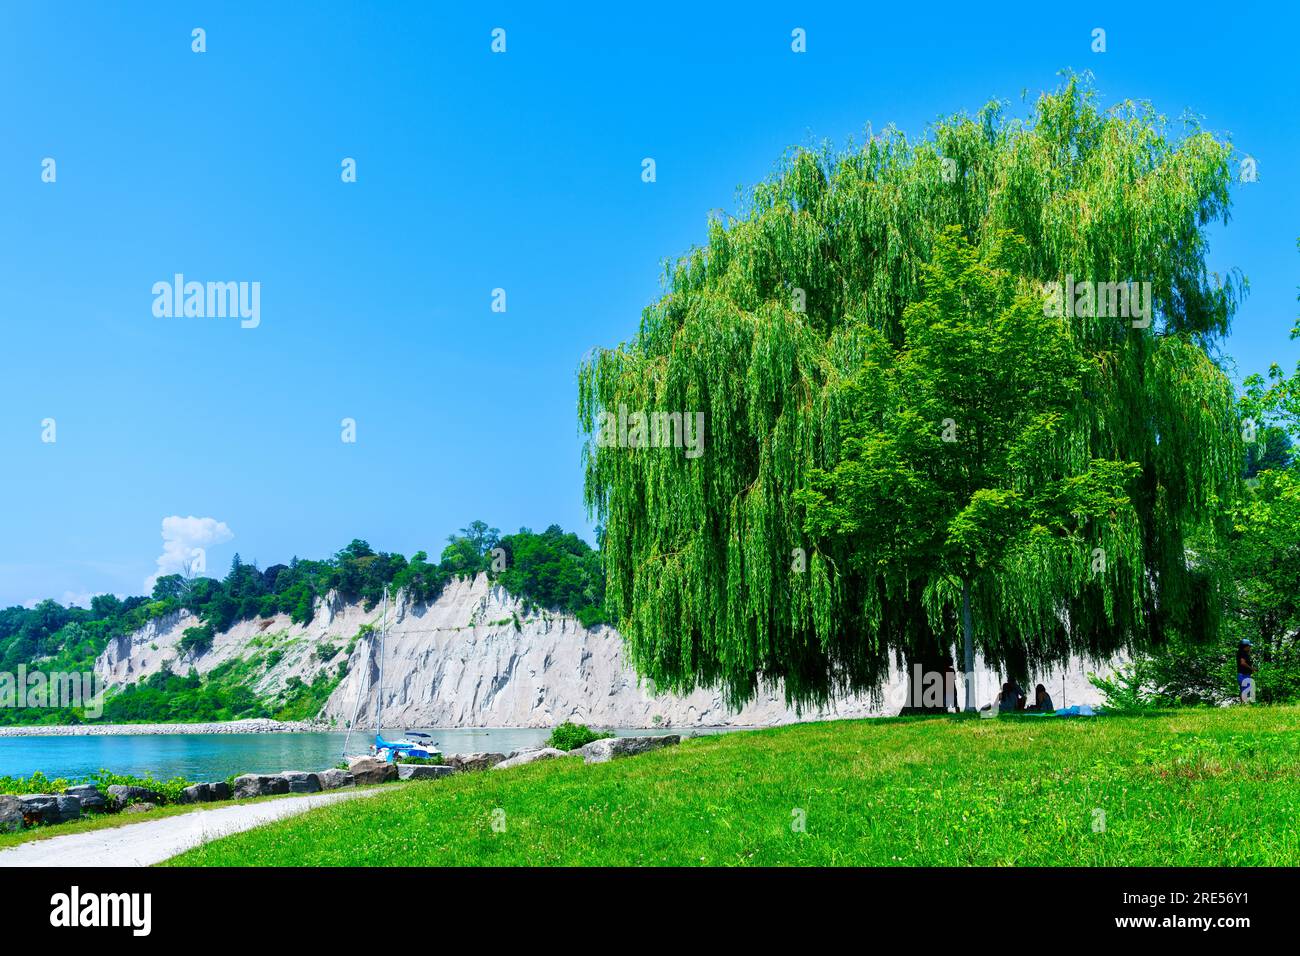 Toronto, Canada - July 23, 2023: People sitting below a lonely tree in the Scarborough Bluffs by Lake Ontario. The famous natural landmark is named Bl Stock Photo